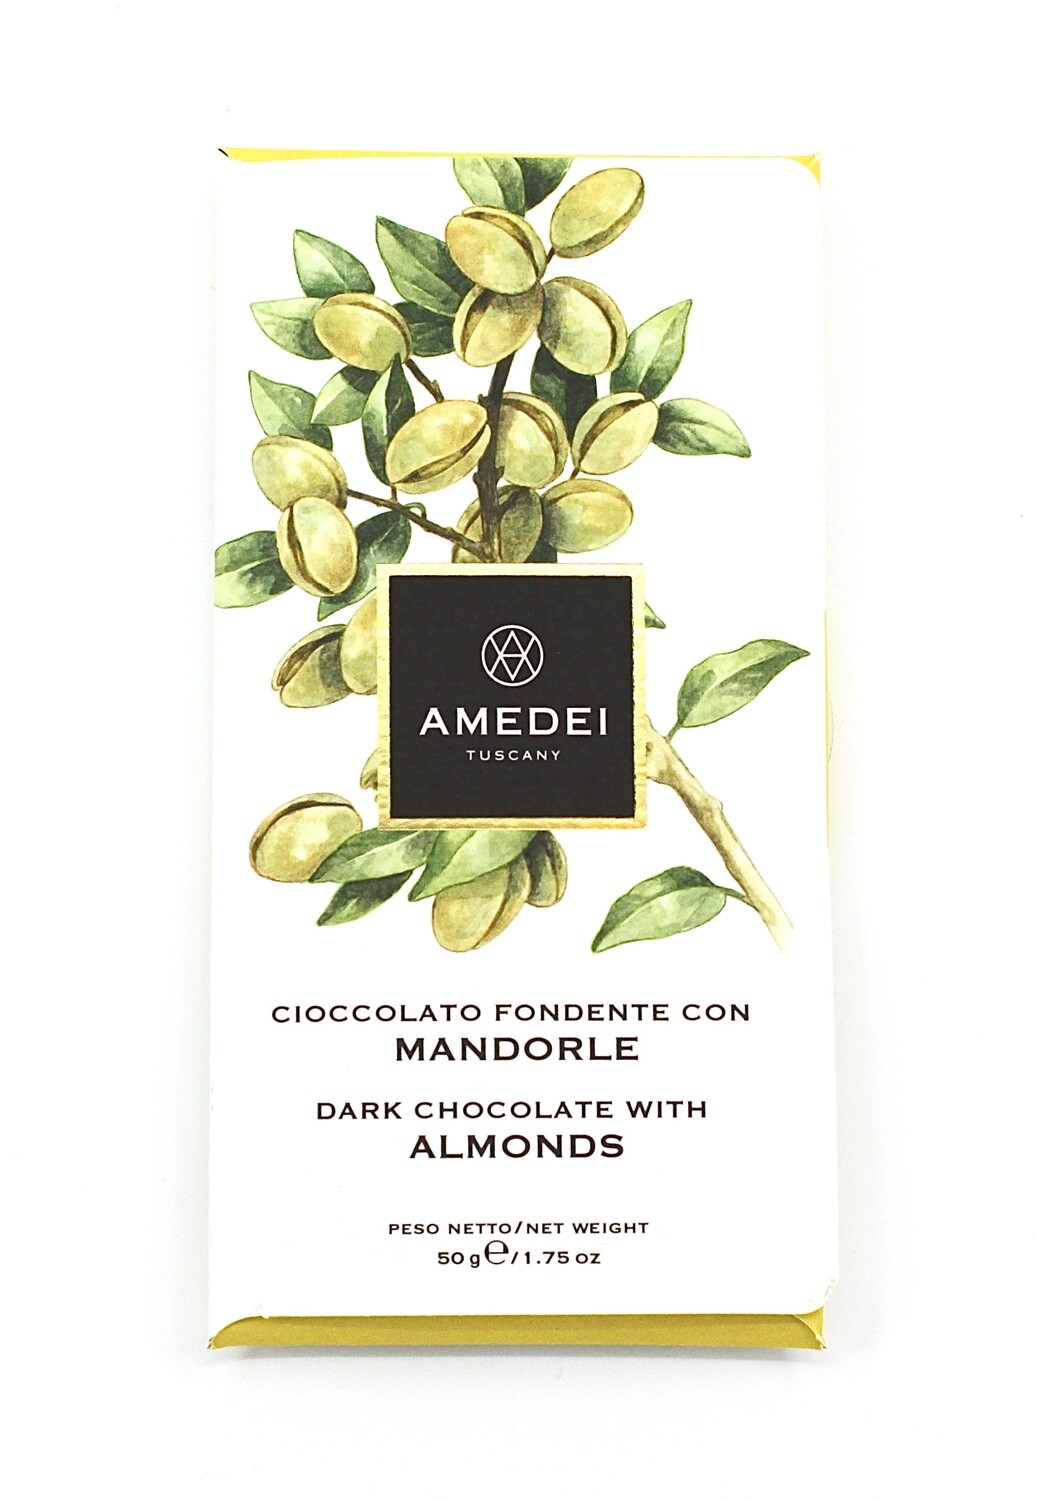 Amedei DK with Almonds